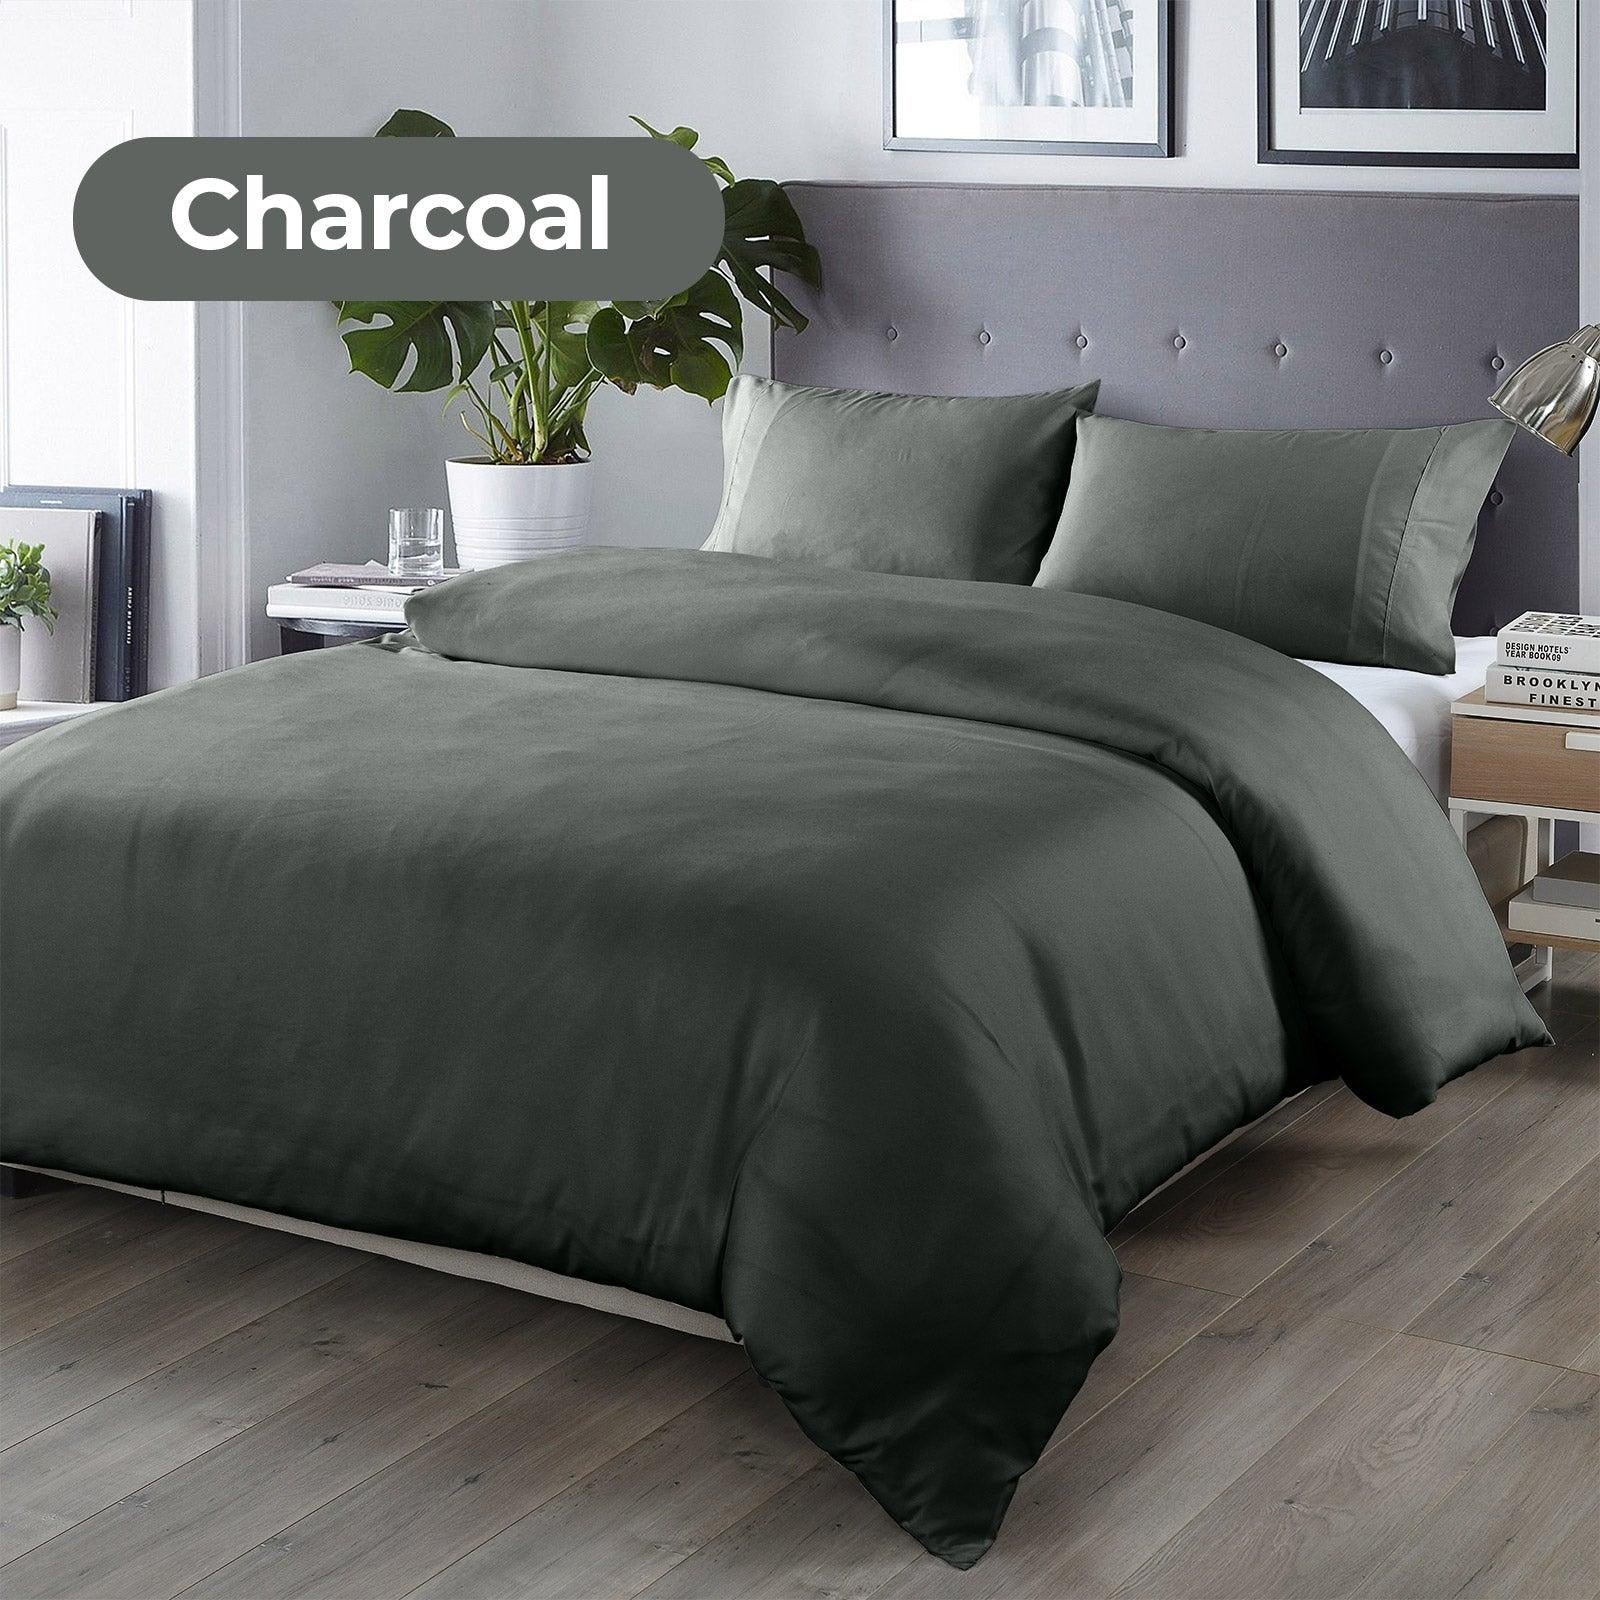 Royal Comfort Bamboo Blended Quilt Cover Set 1000TC Ultra Soft Luxury Bedding King Charcoal Deals499